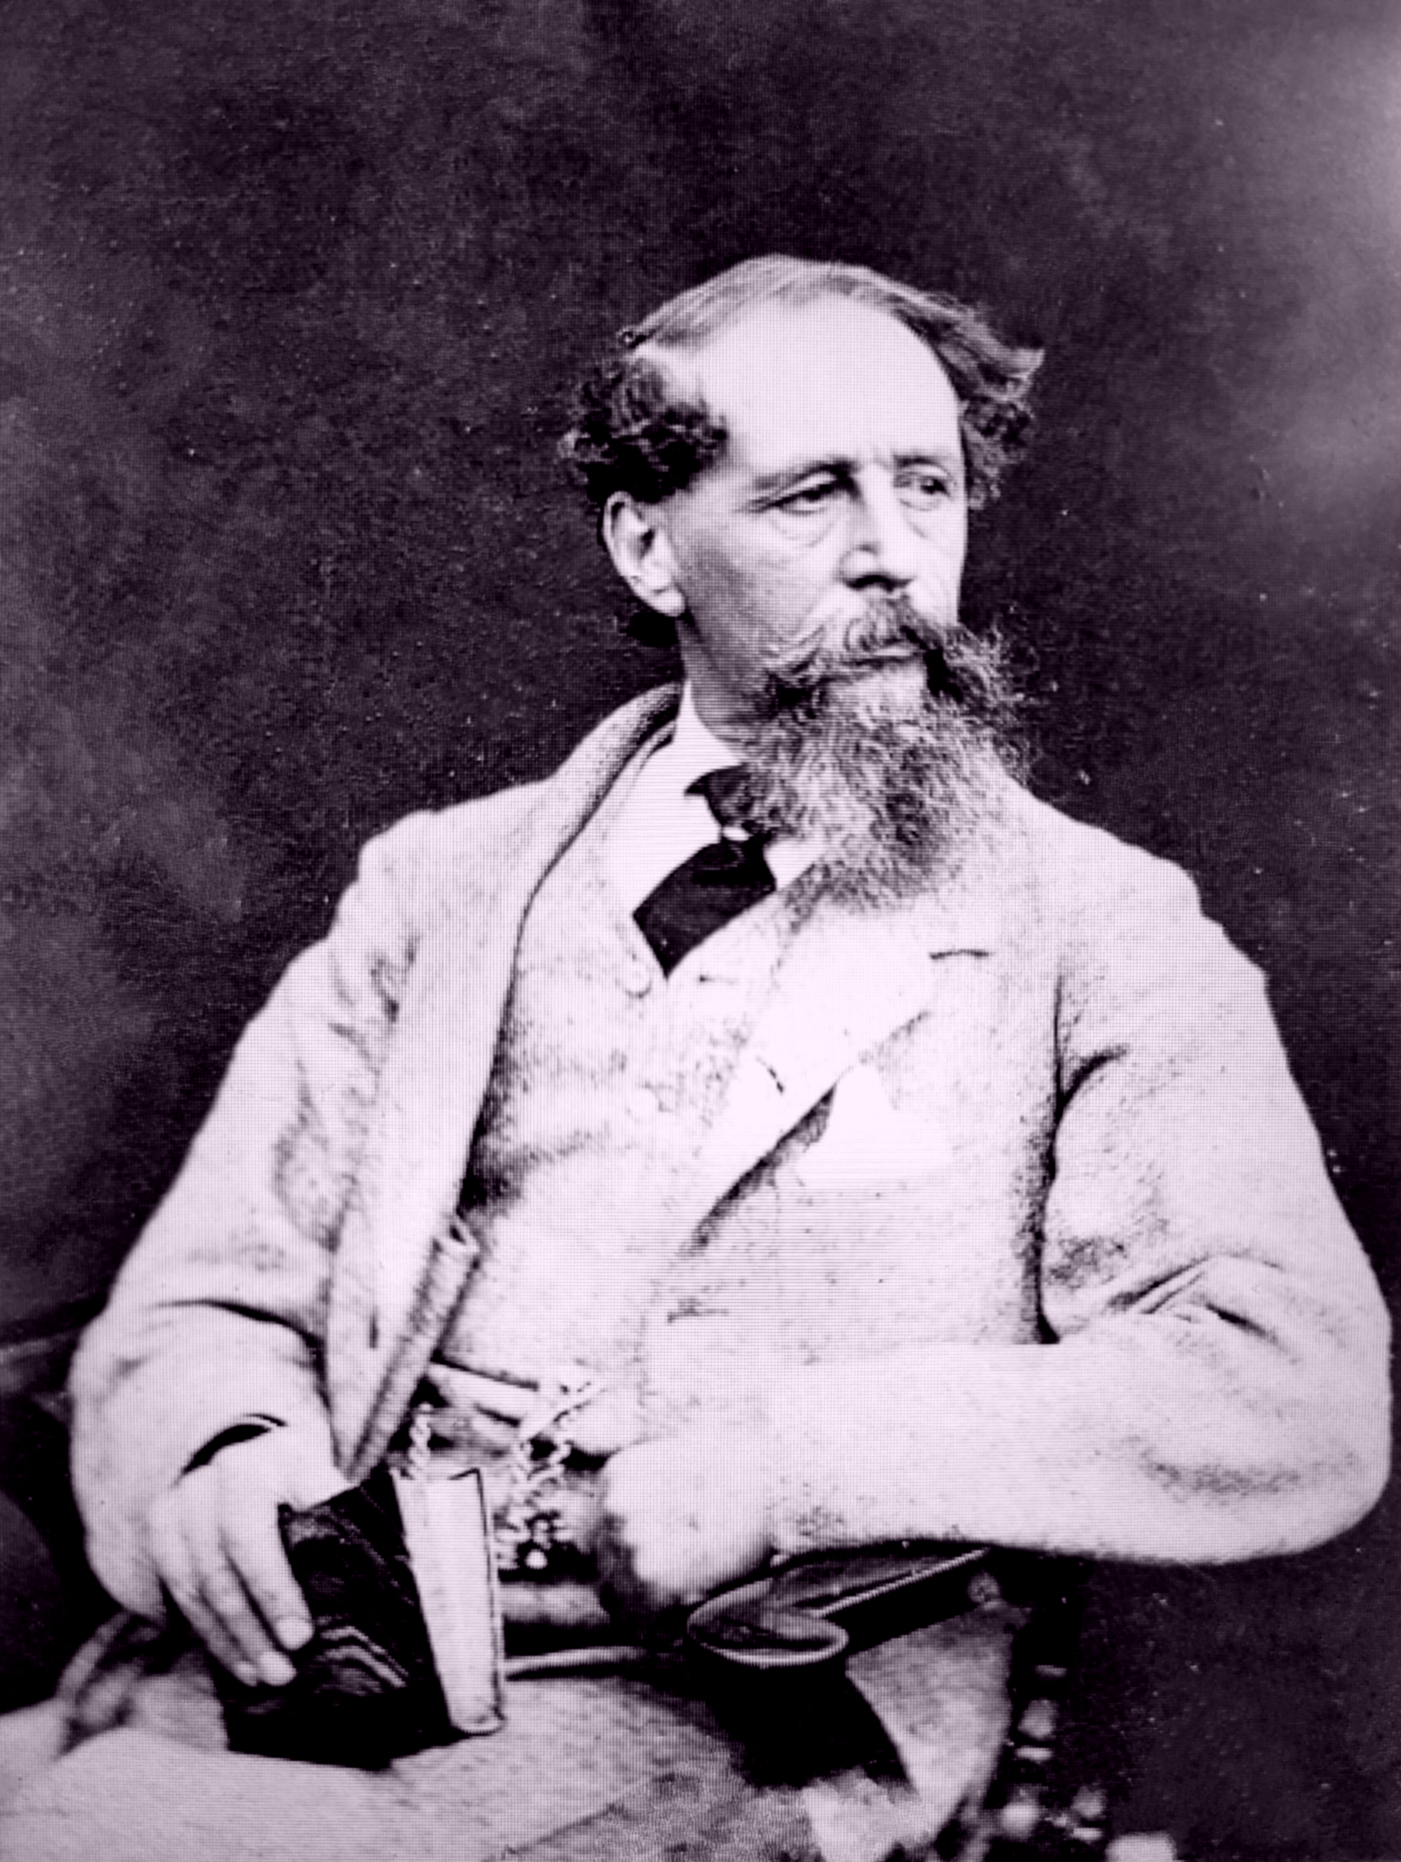 Charles Dickens holding a book wearing a suit with Albert Chain Tie and sporting handlebar moustache and whiskers. Black and White Photograph.